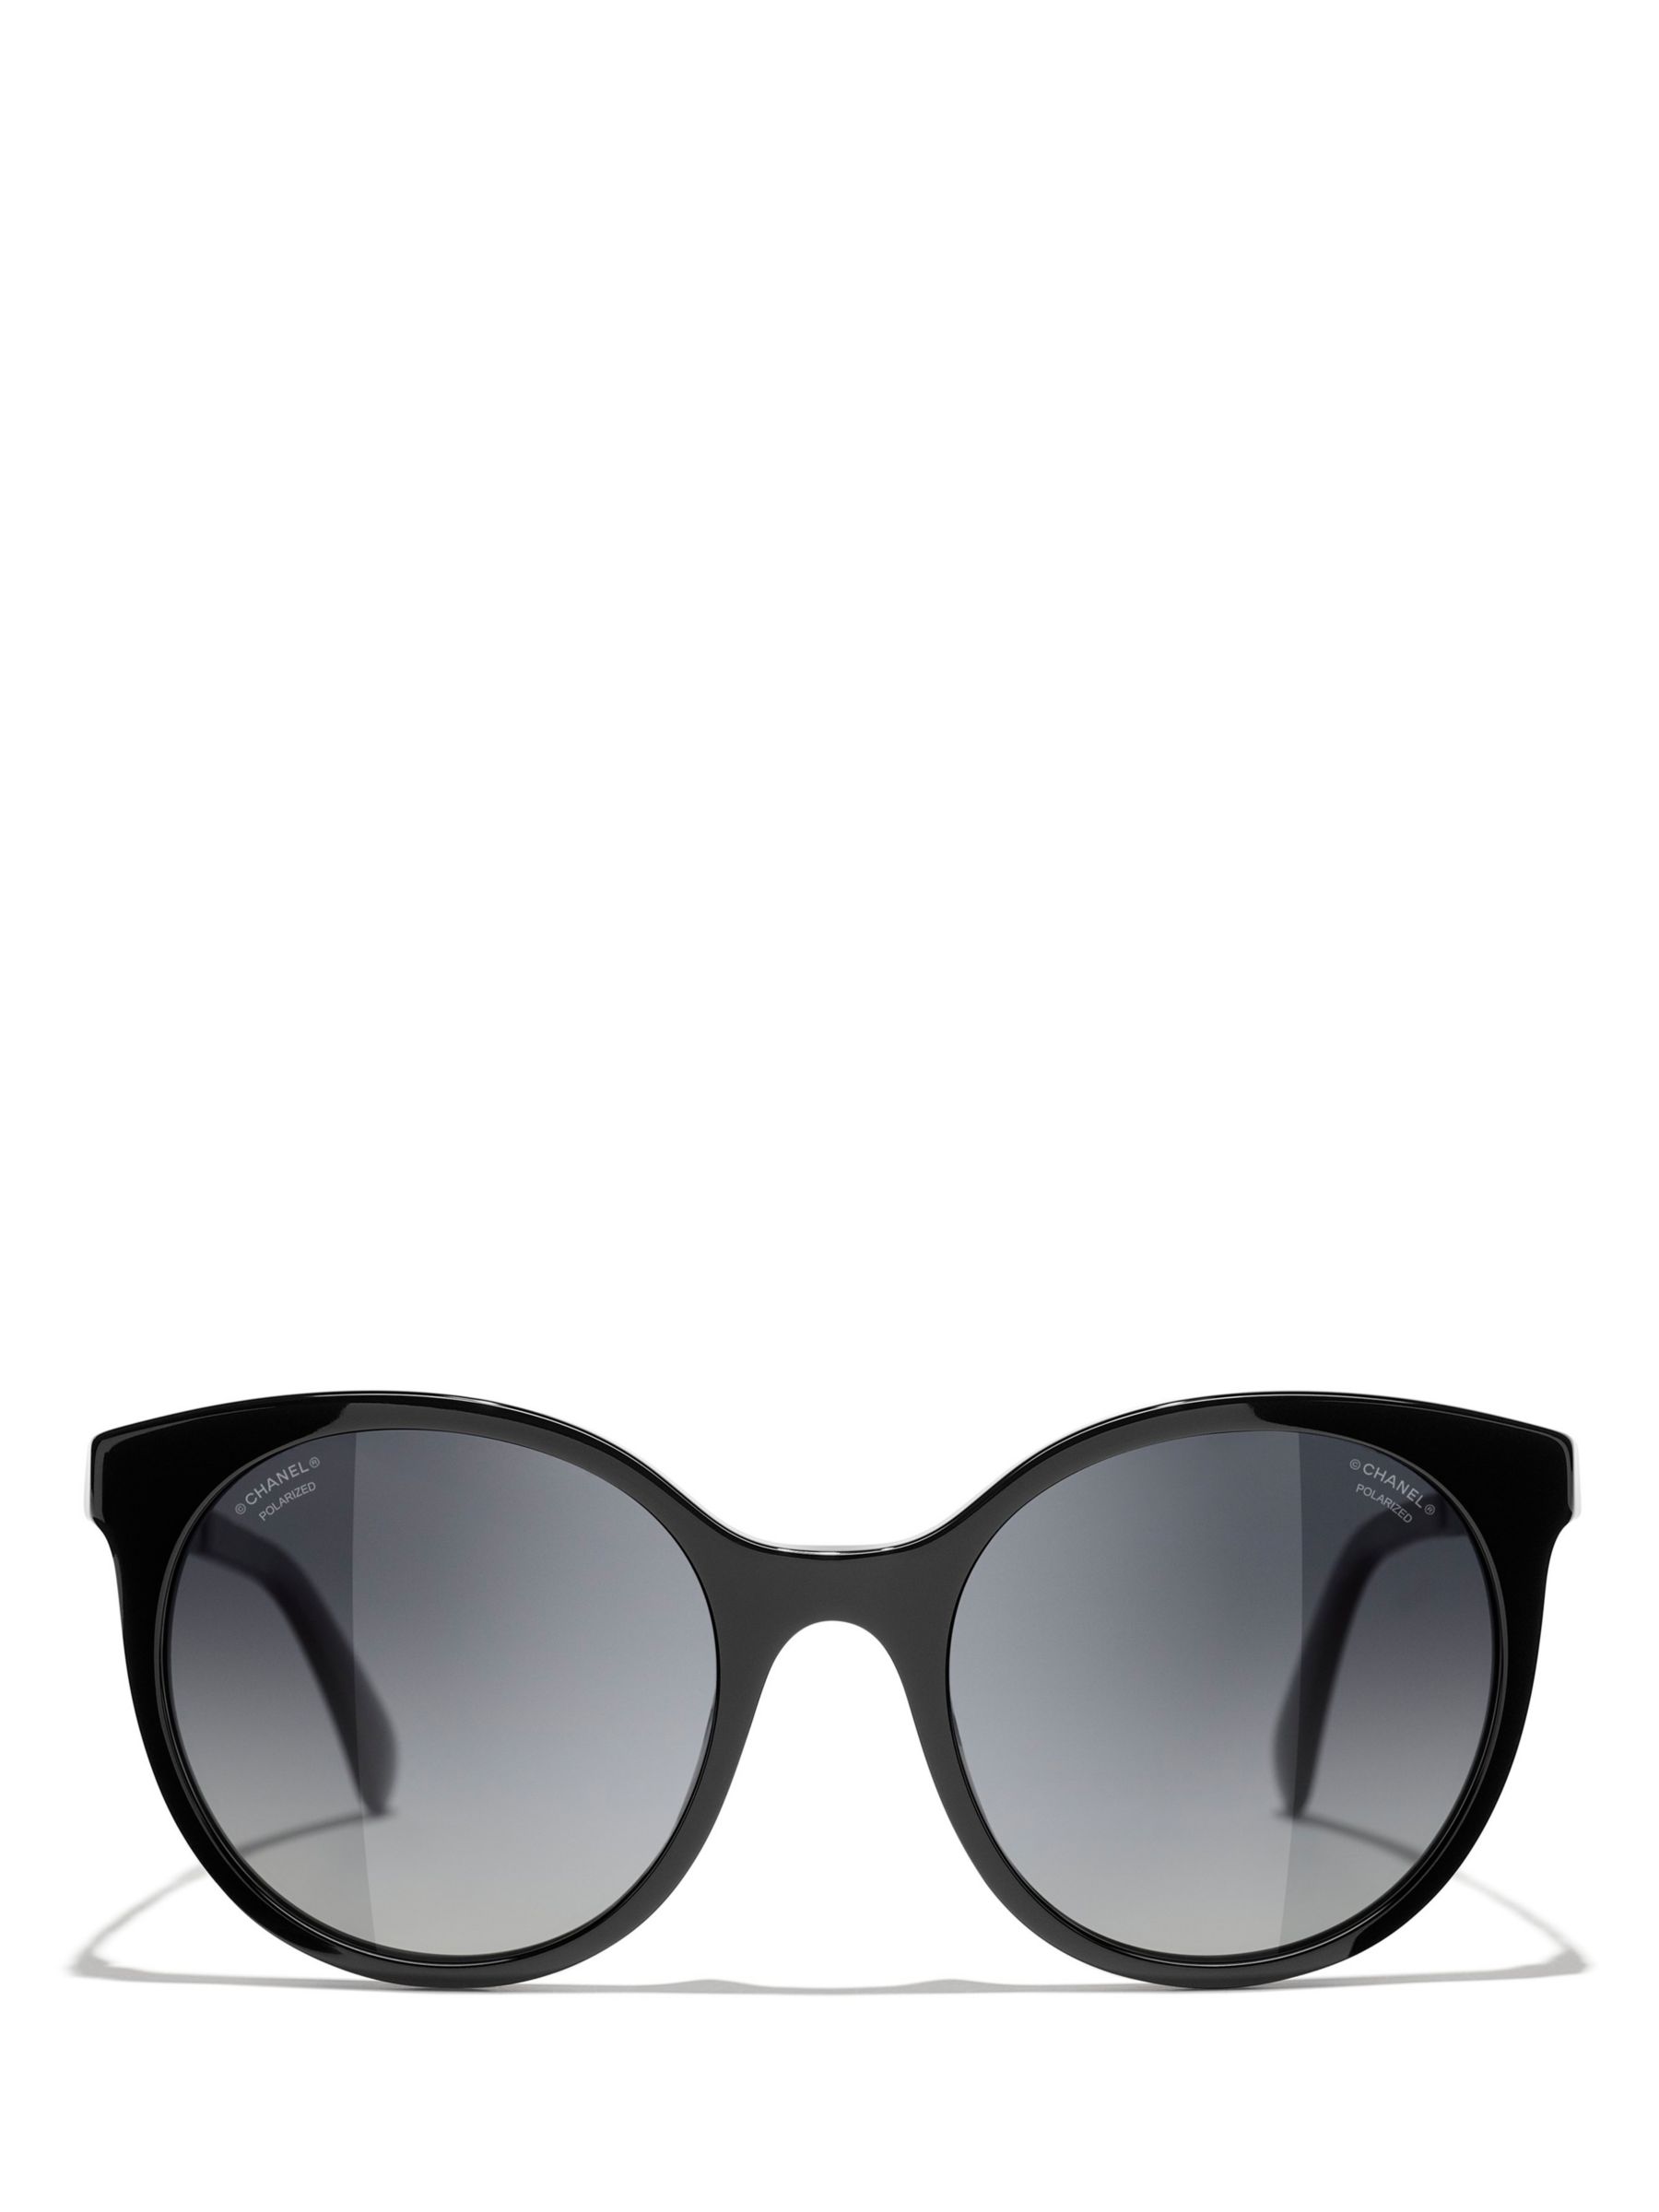 CHANEL Oval Sunglasses CH5440 Black/Grey Gradient at John Lewis & Partners